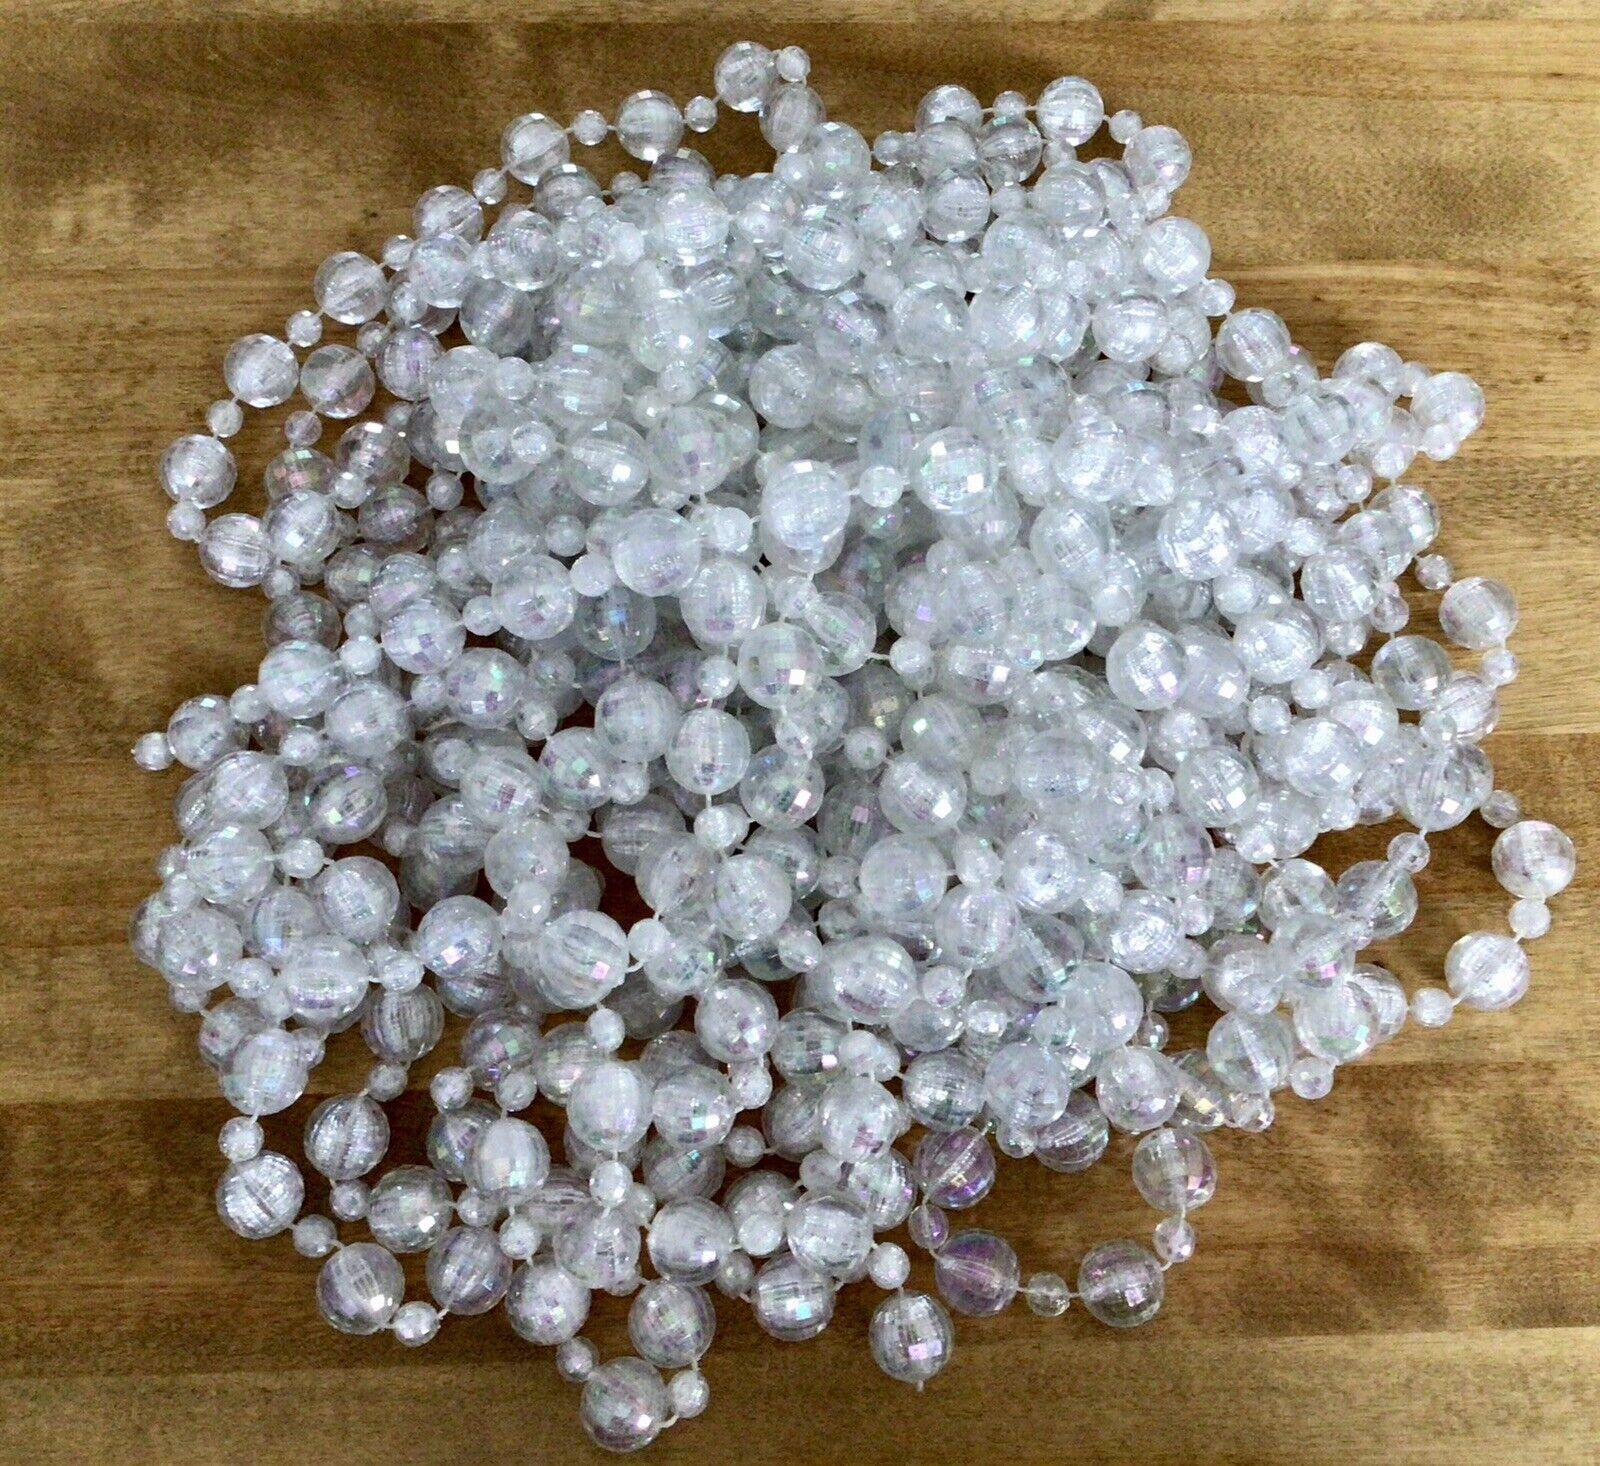 VTG Resin Faux Crystal Faceted Iridescent Bead Garland, Seven 100 Inch Strands